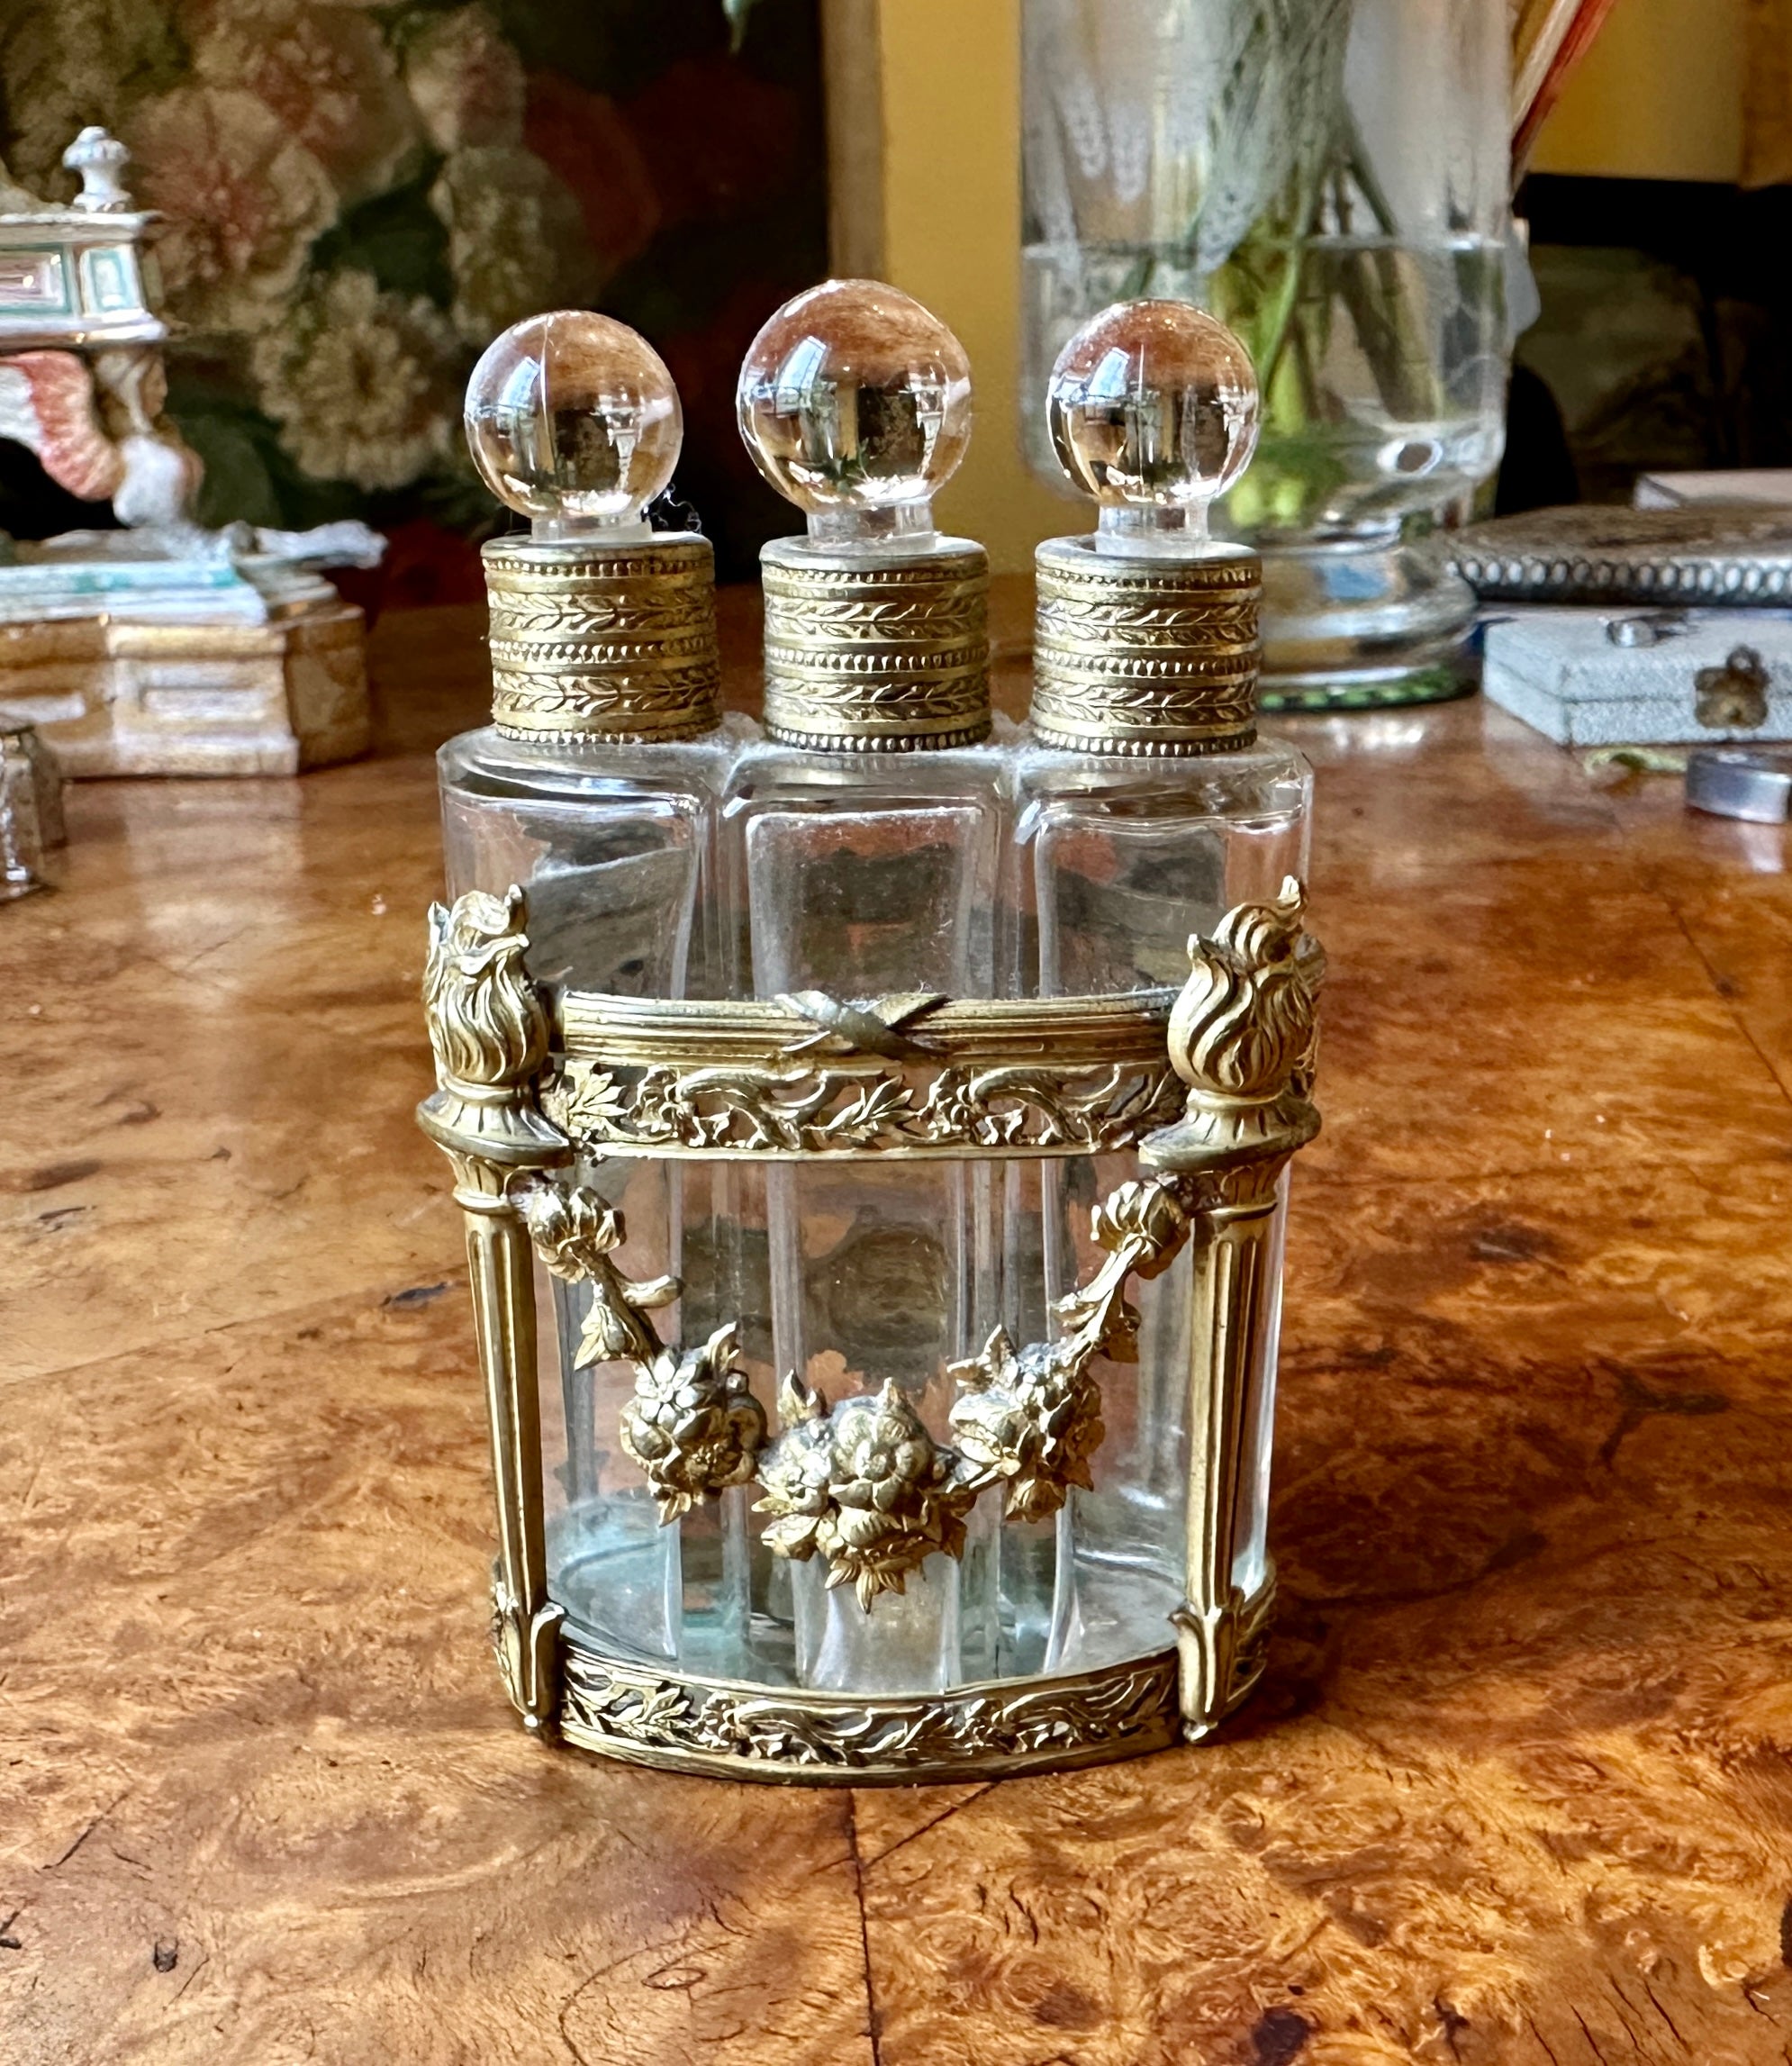 This is a gorgeous antique French Bronze Dore triple perfume bottle caddy set dating to circa 1860-1890.  The set is composed of a found ormolu gilt bronze carriage in cast and gilt bronze with three glass fitted bottles with round stoppers. The